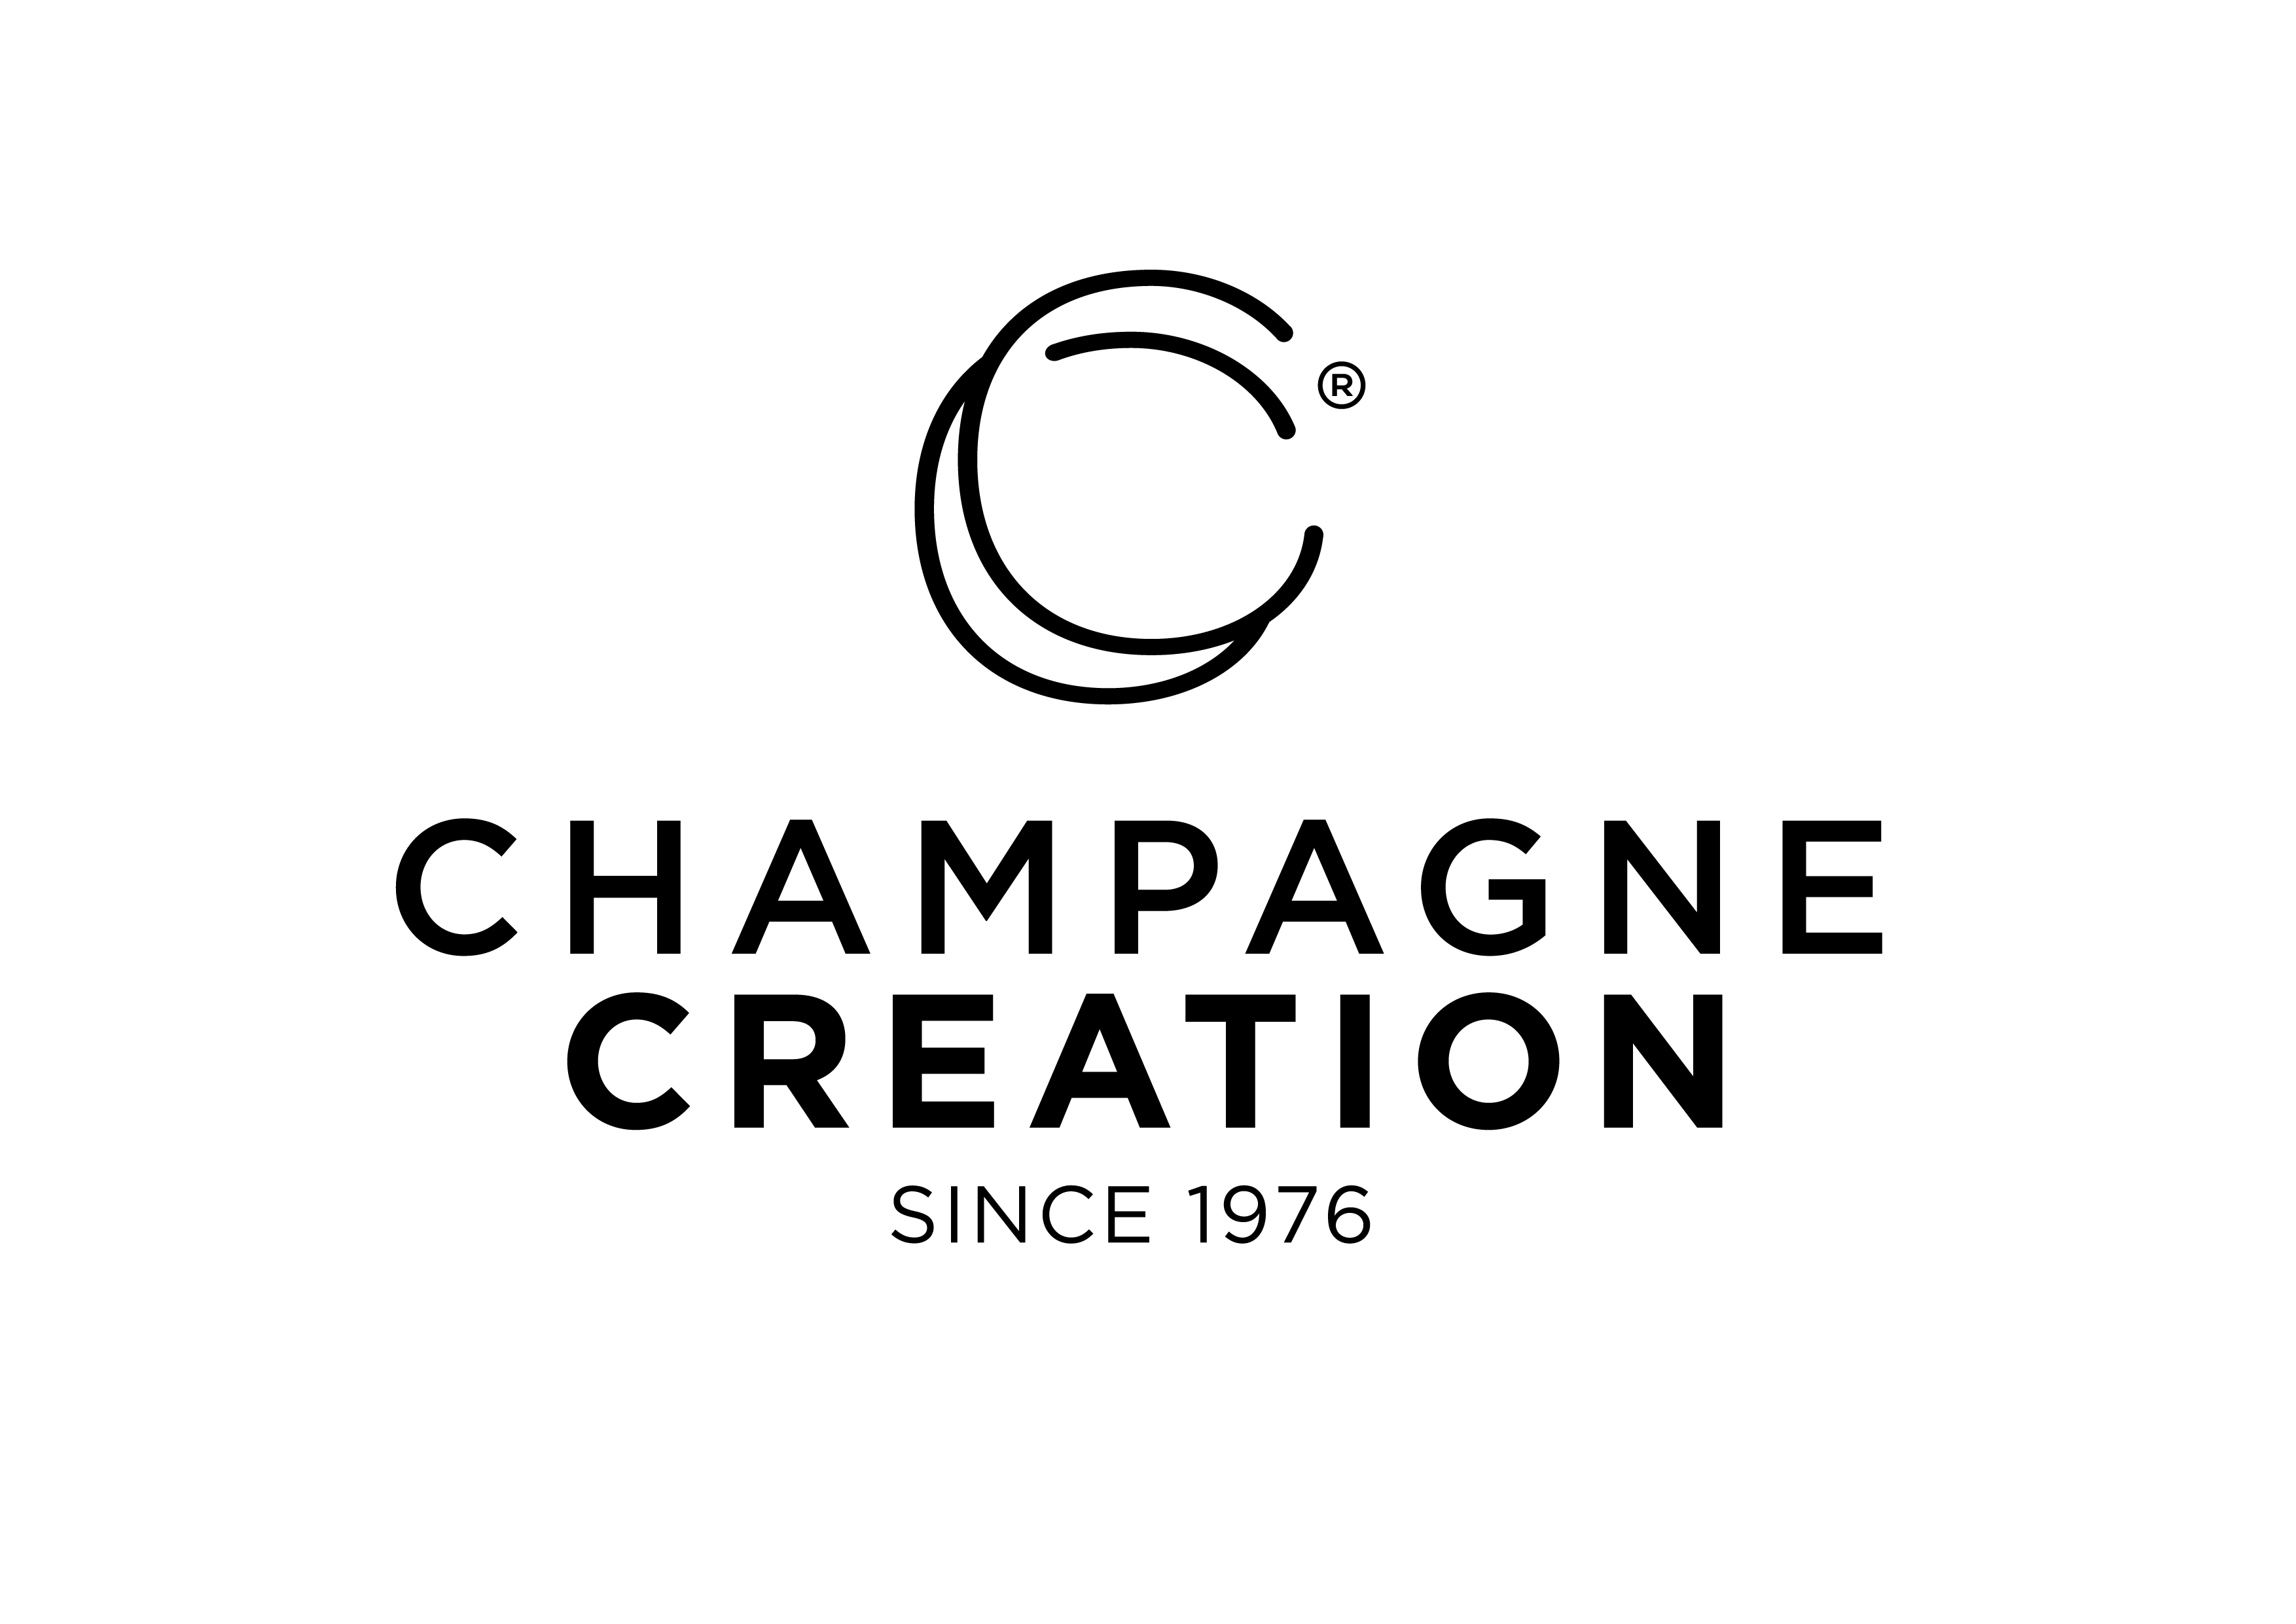 Champagne création